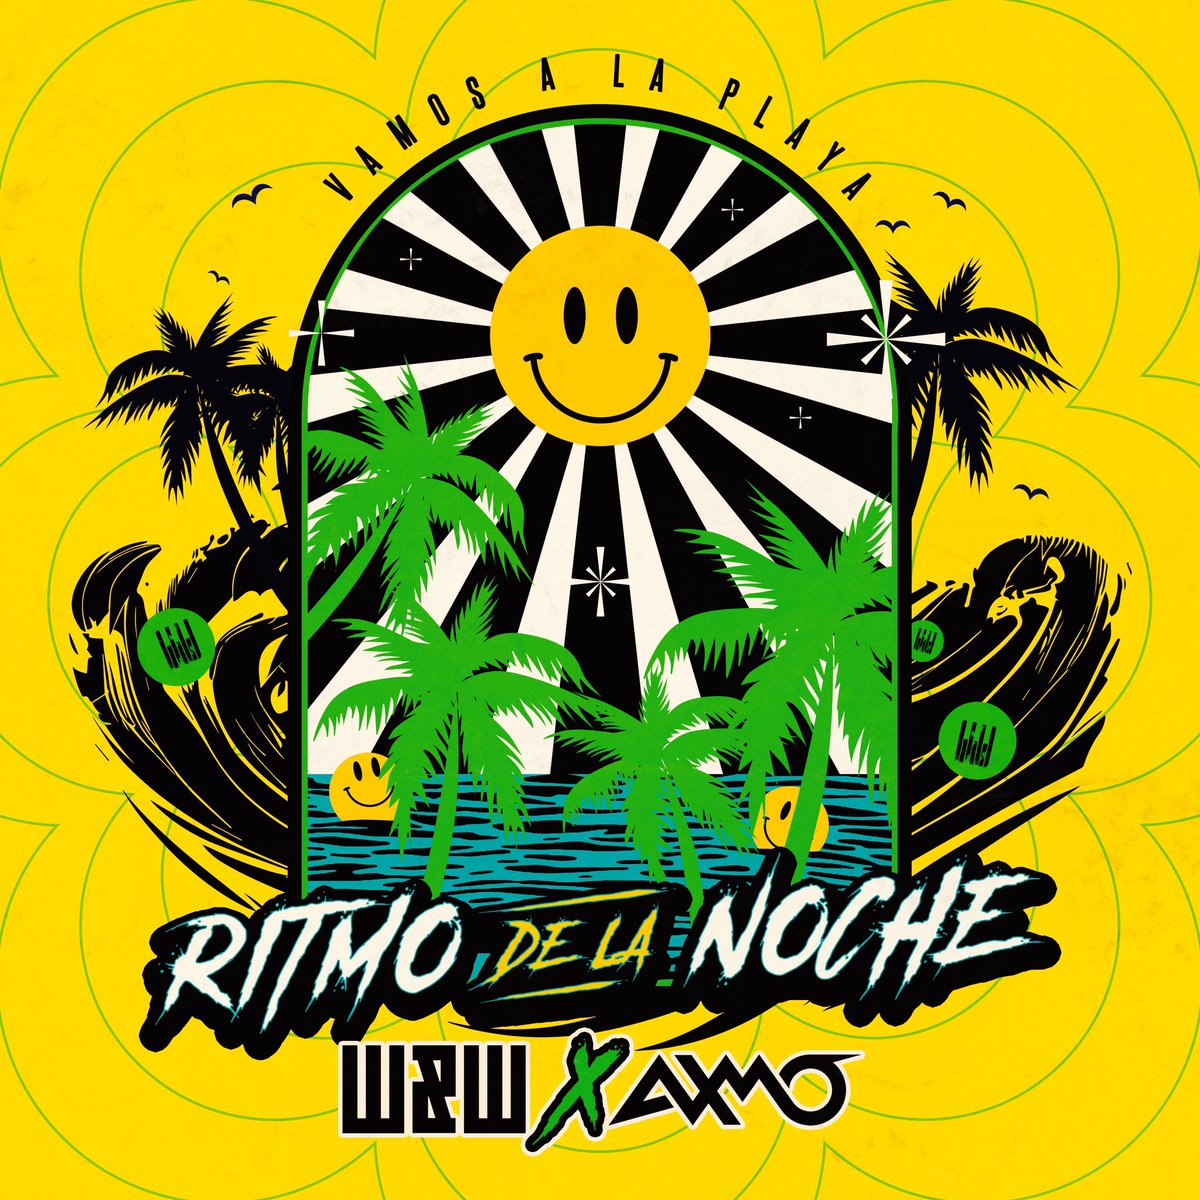 Ready for some summer vibes?! „Ritmo De La Notche“ together with our brothers @WandWmusic will be OUT on the 28th of July on @raveculture !